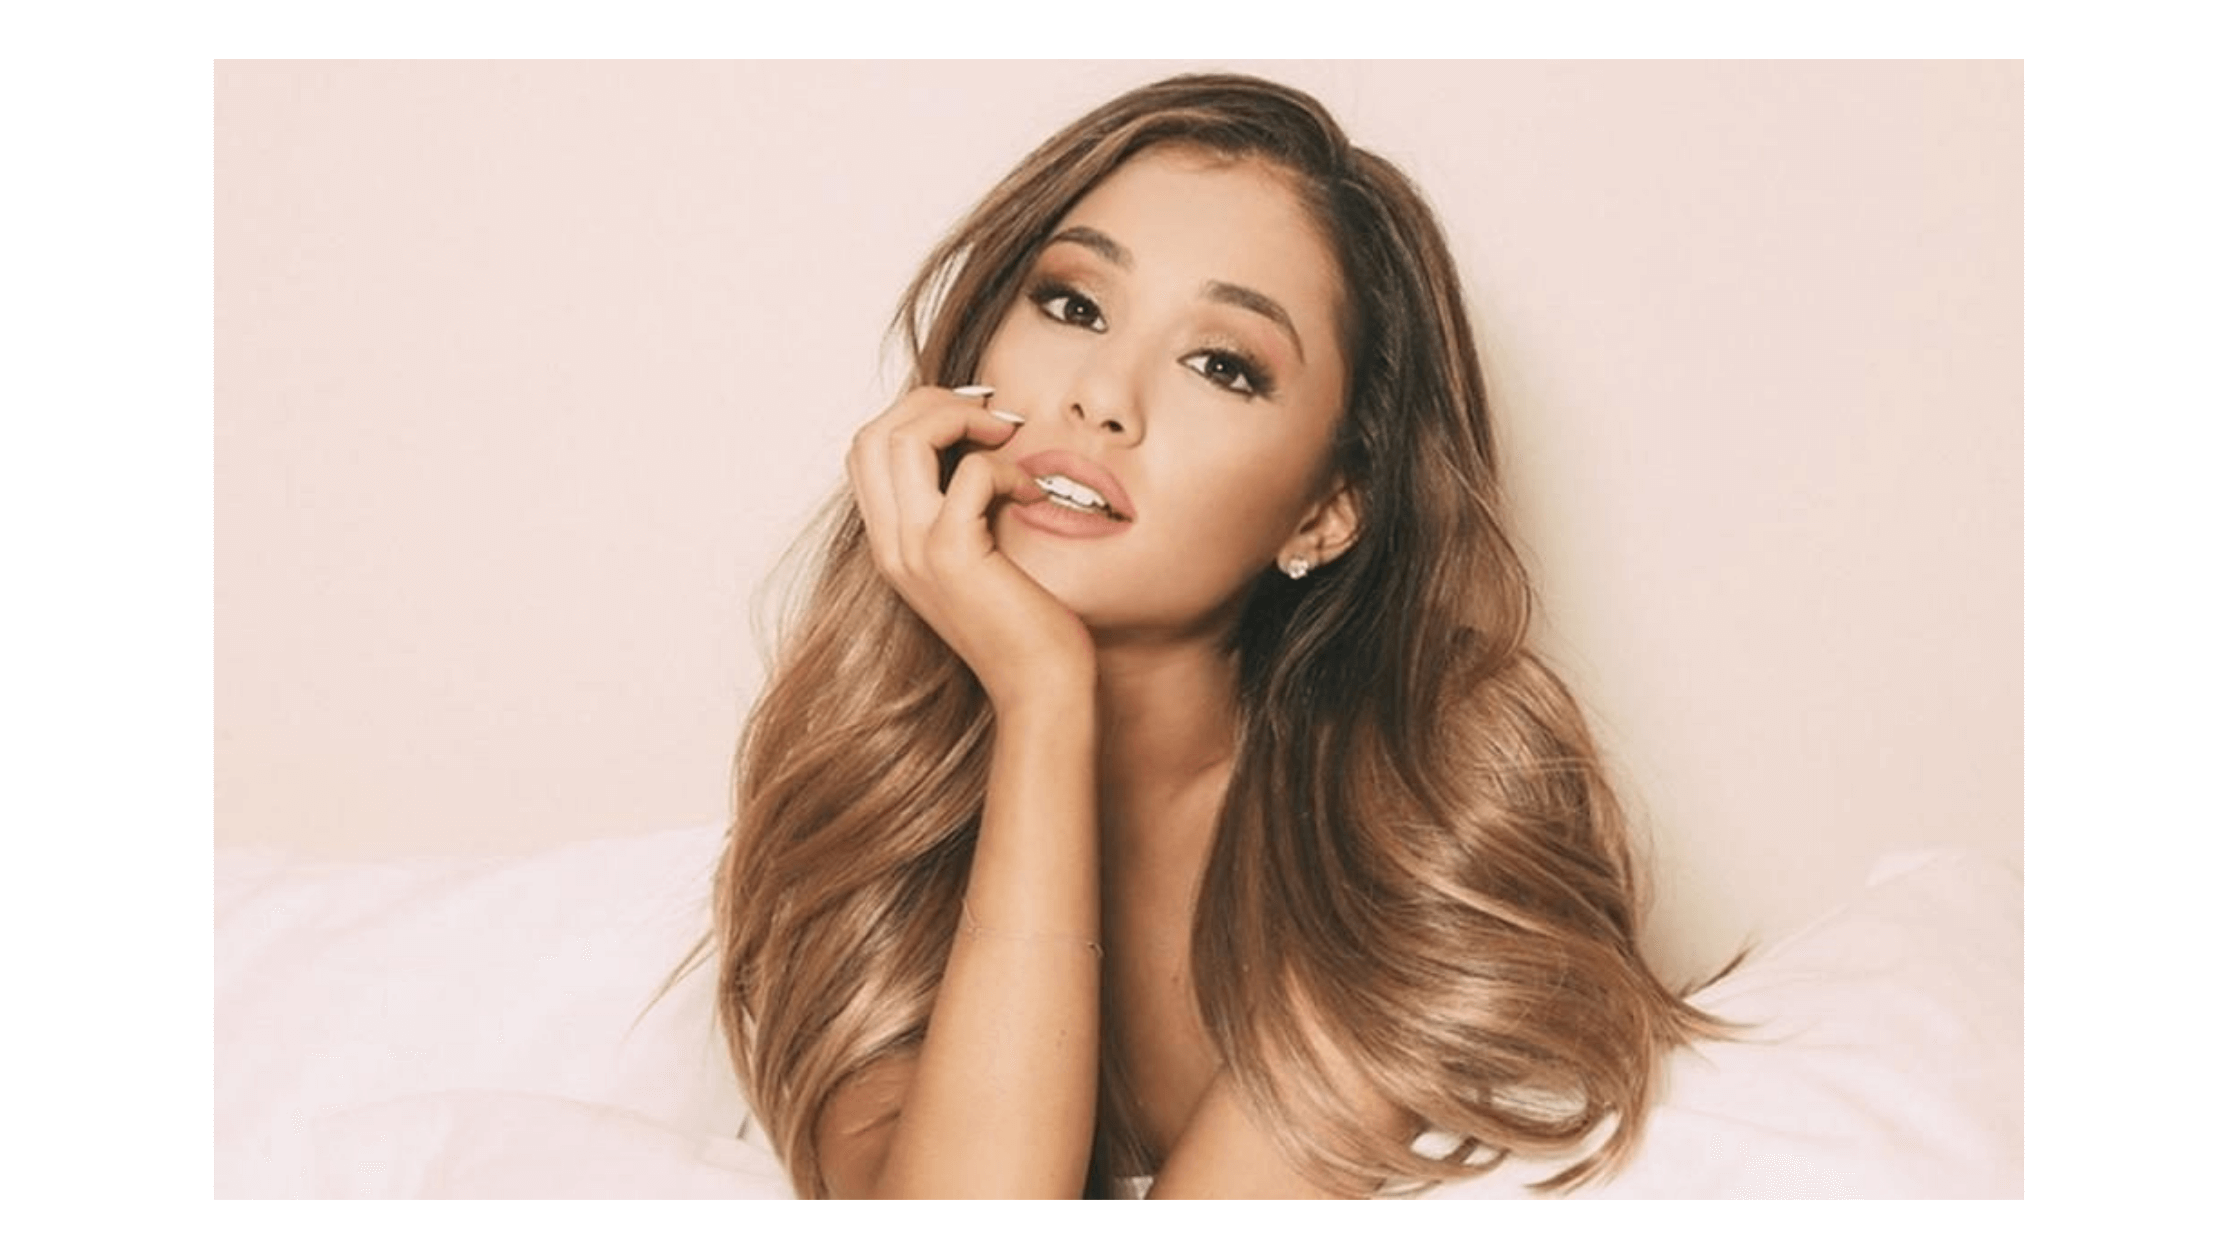 Who Is Ariana Grande And What Is Her Net Worth?